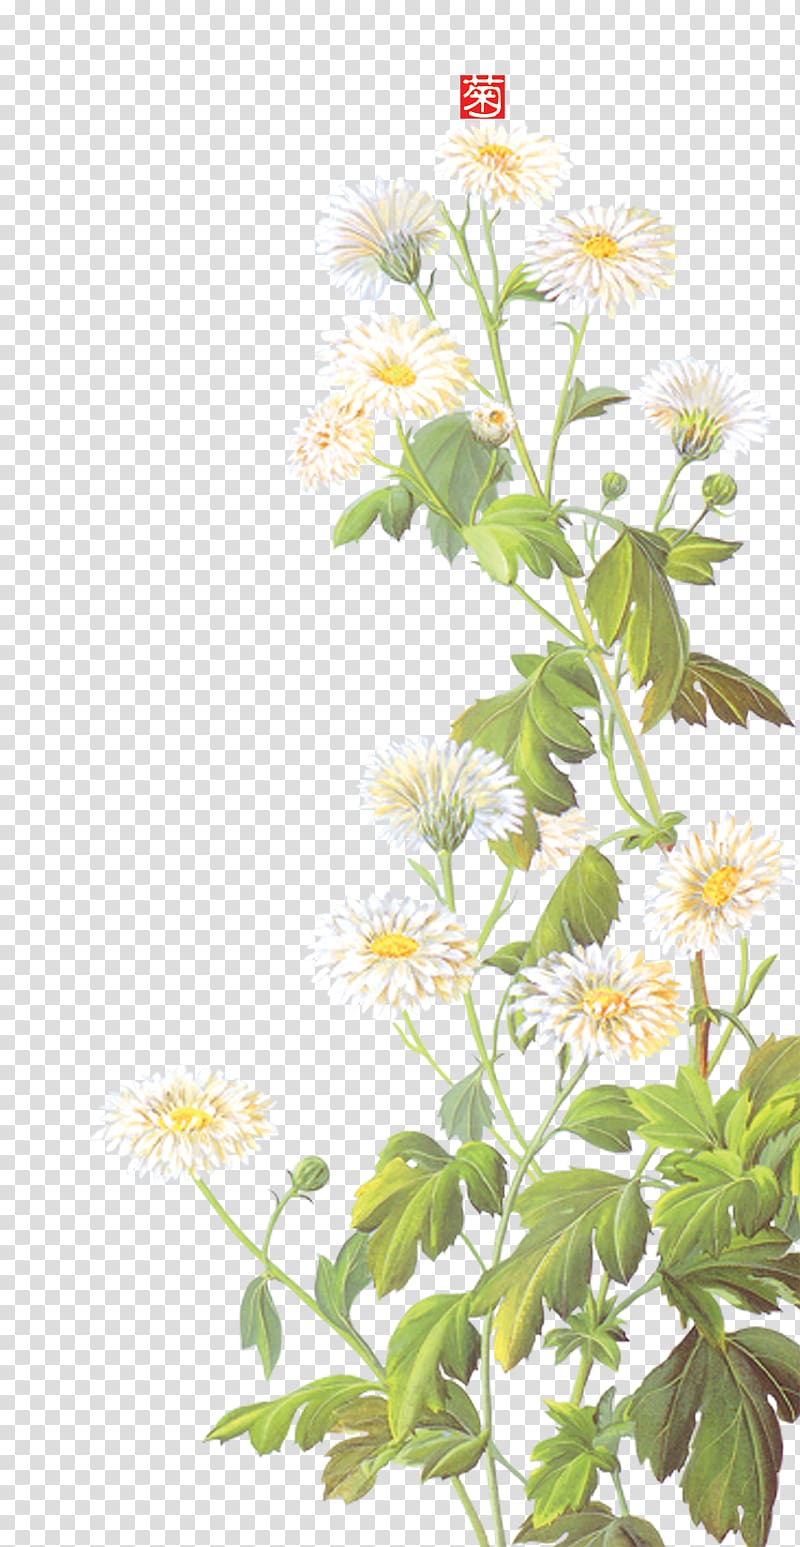 white petaled flower, Daisy background material transparent background PNG clipart